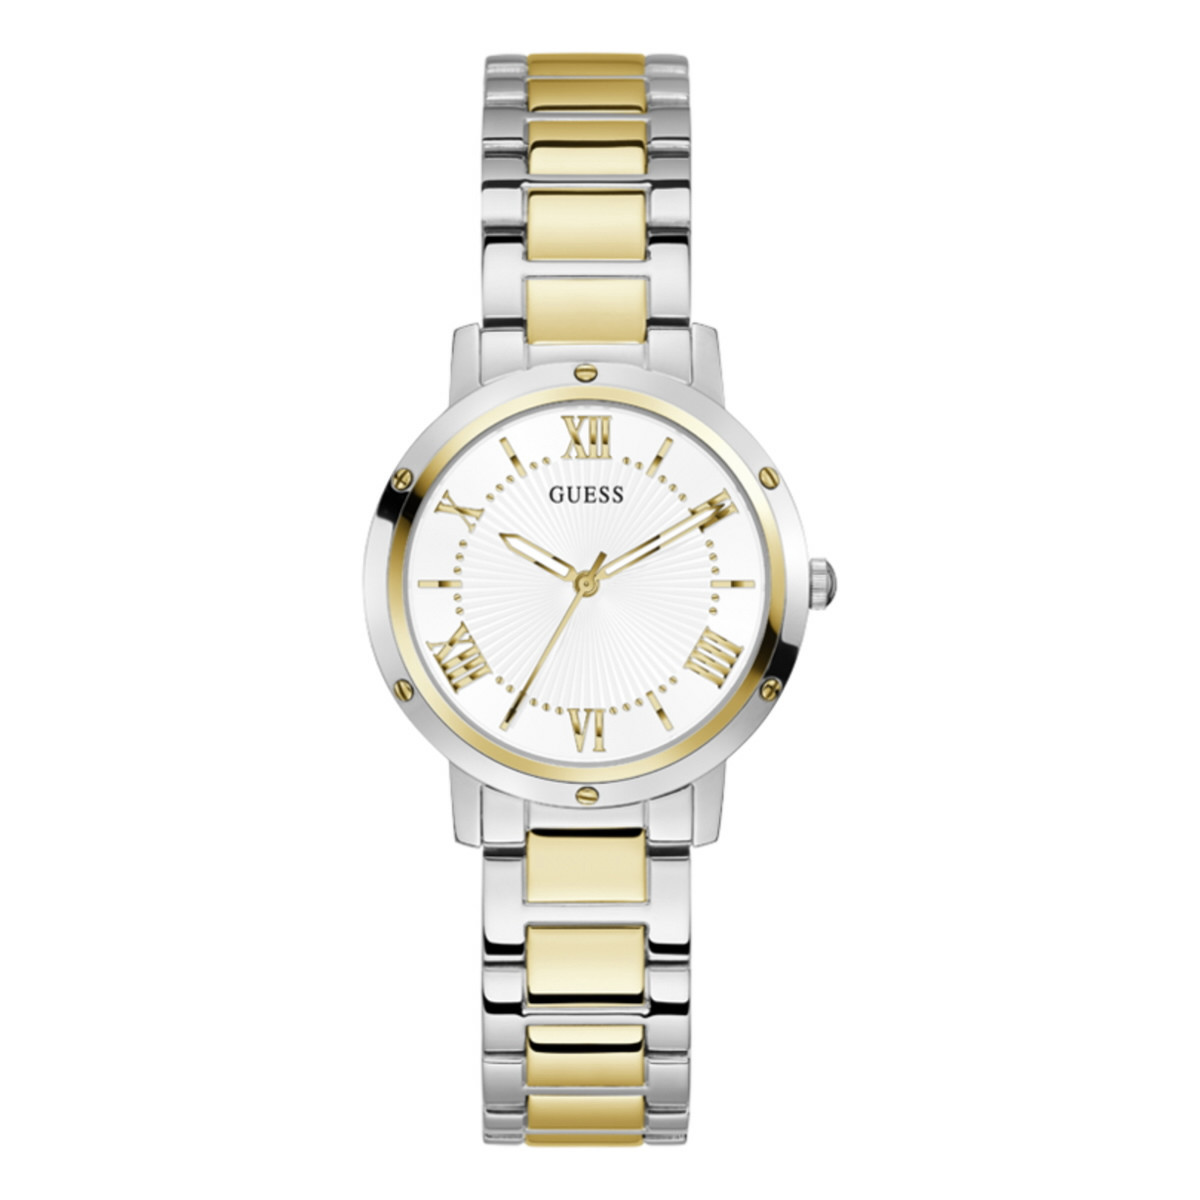 DAWN GUESS WATCHES LADIES